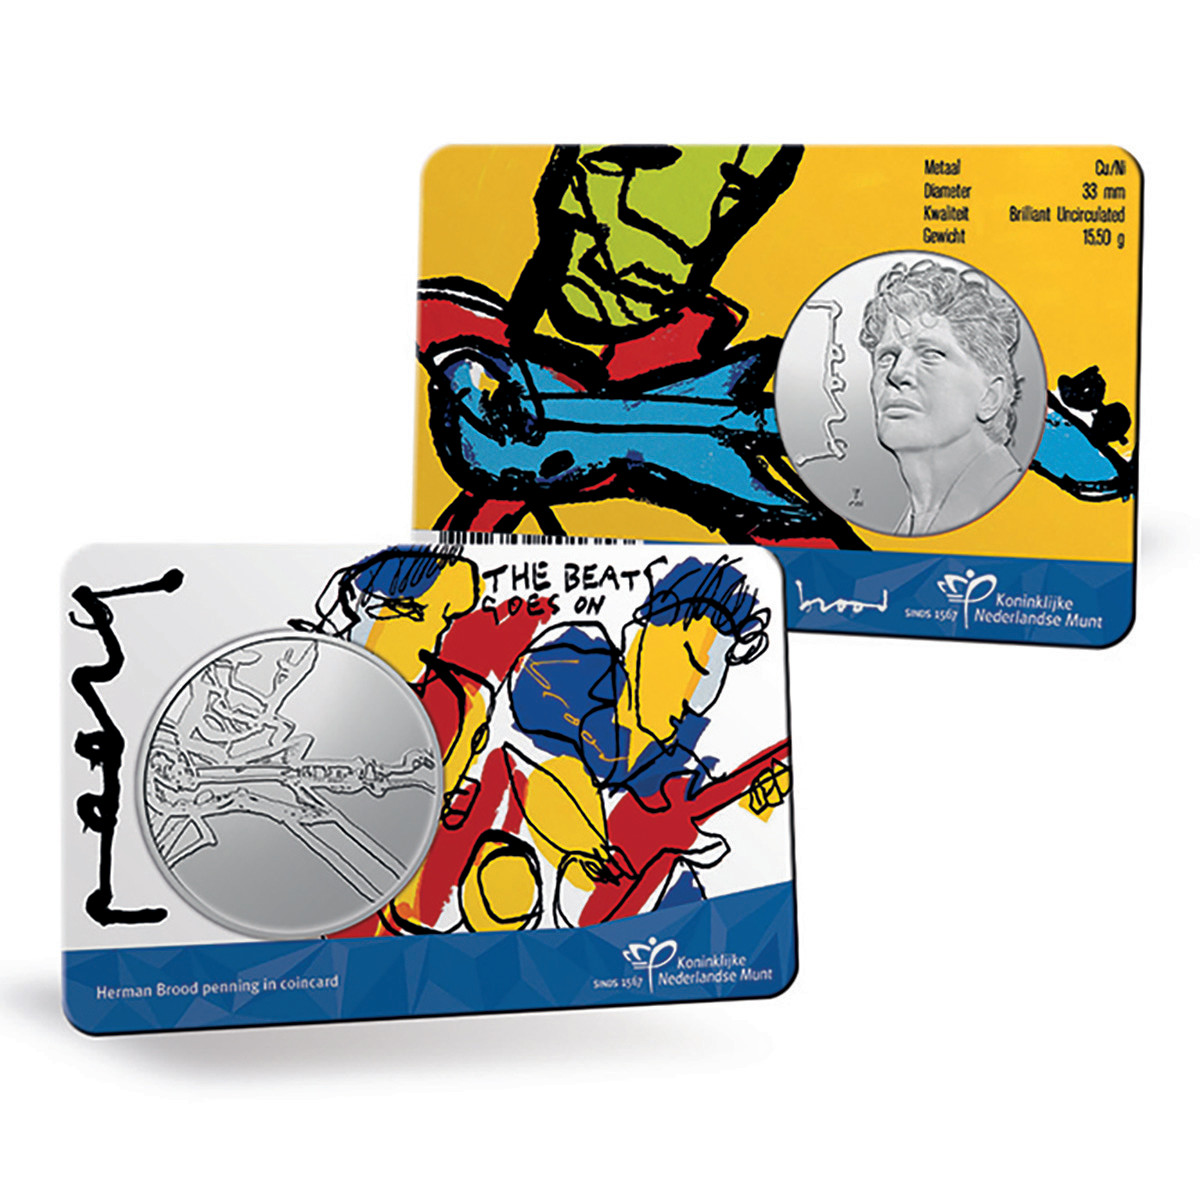 The coin card version is a perfect way to enjoy the art of Herman Brood, with his “Gitaarman” and “The Beat Goes On”, along with the medal honoring him.